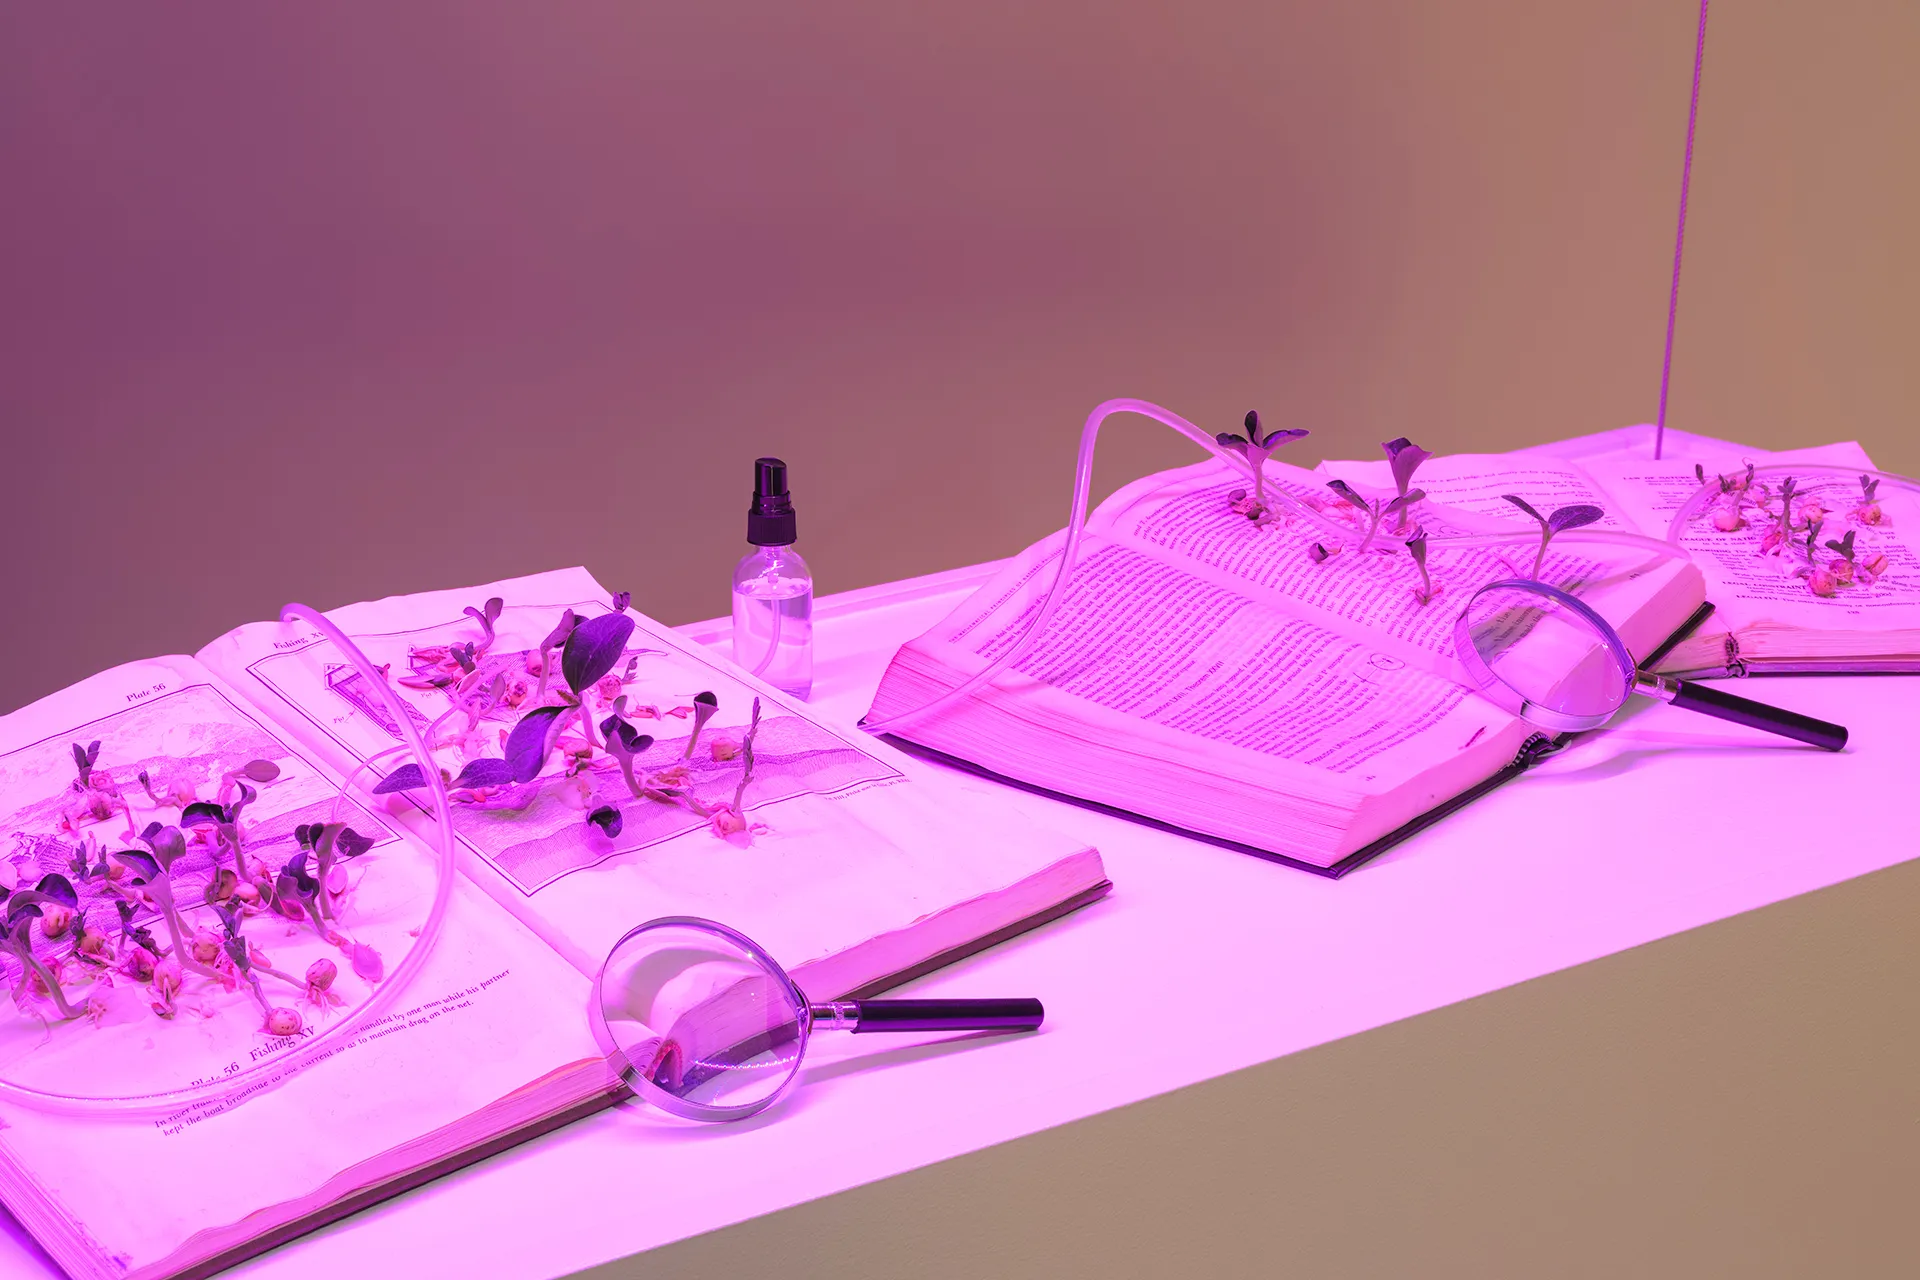 Open books laid out on a narrow platform. Each textbook has a plant growing from its pages and there are magnifying glasses laying against them. Overhead lighting gives the entire scene a purple hue.